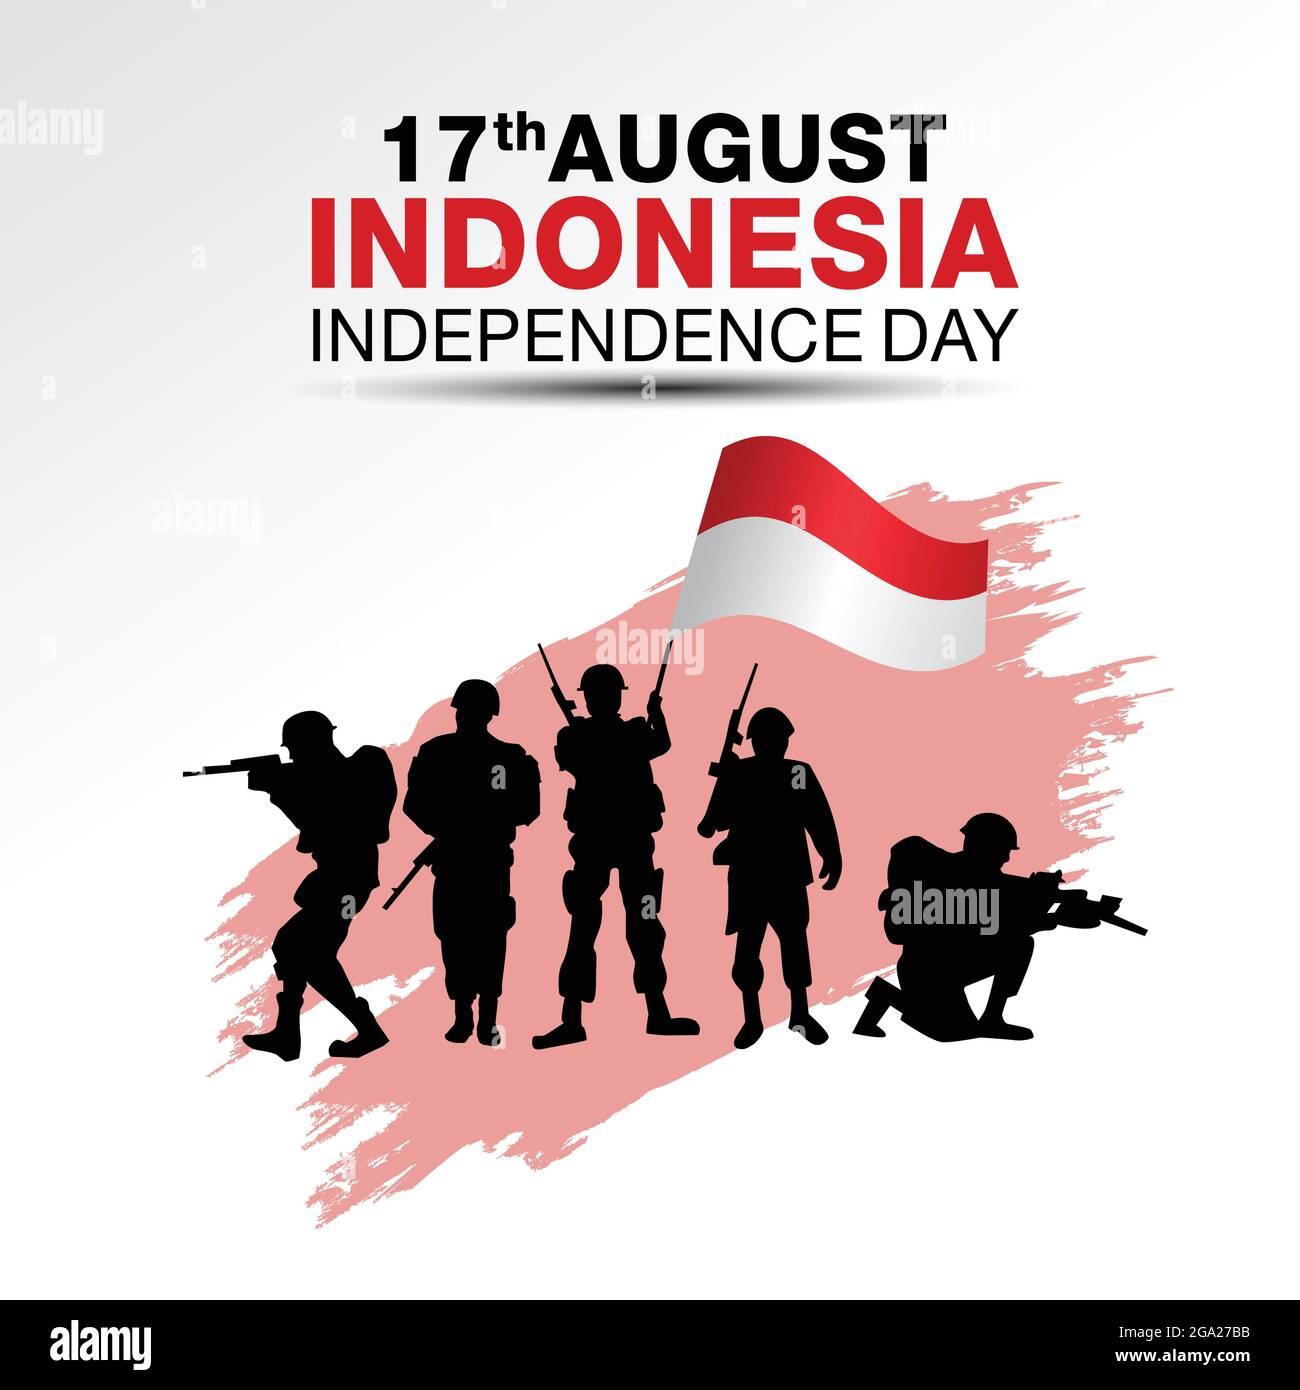 happy independence day Indonesia. vector illustration of Indonesian army with flag. white background Stock Vector